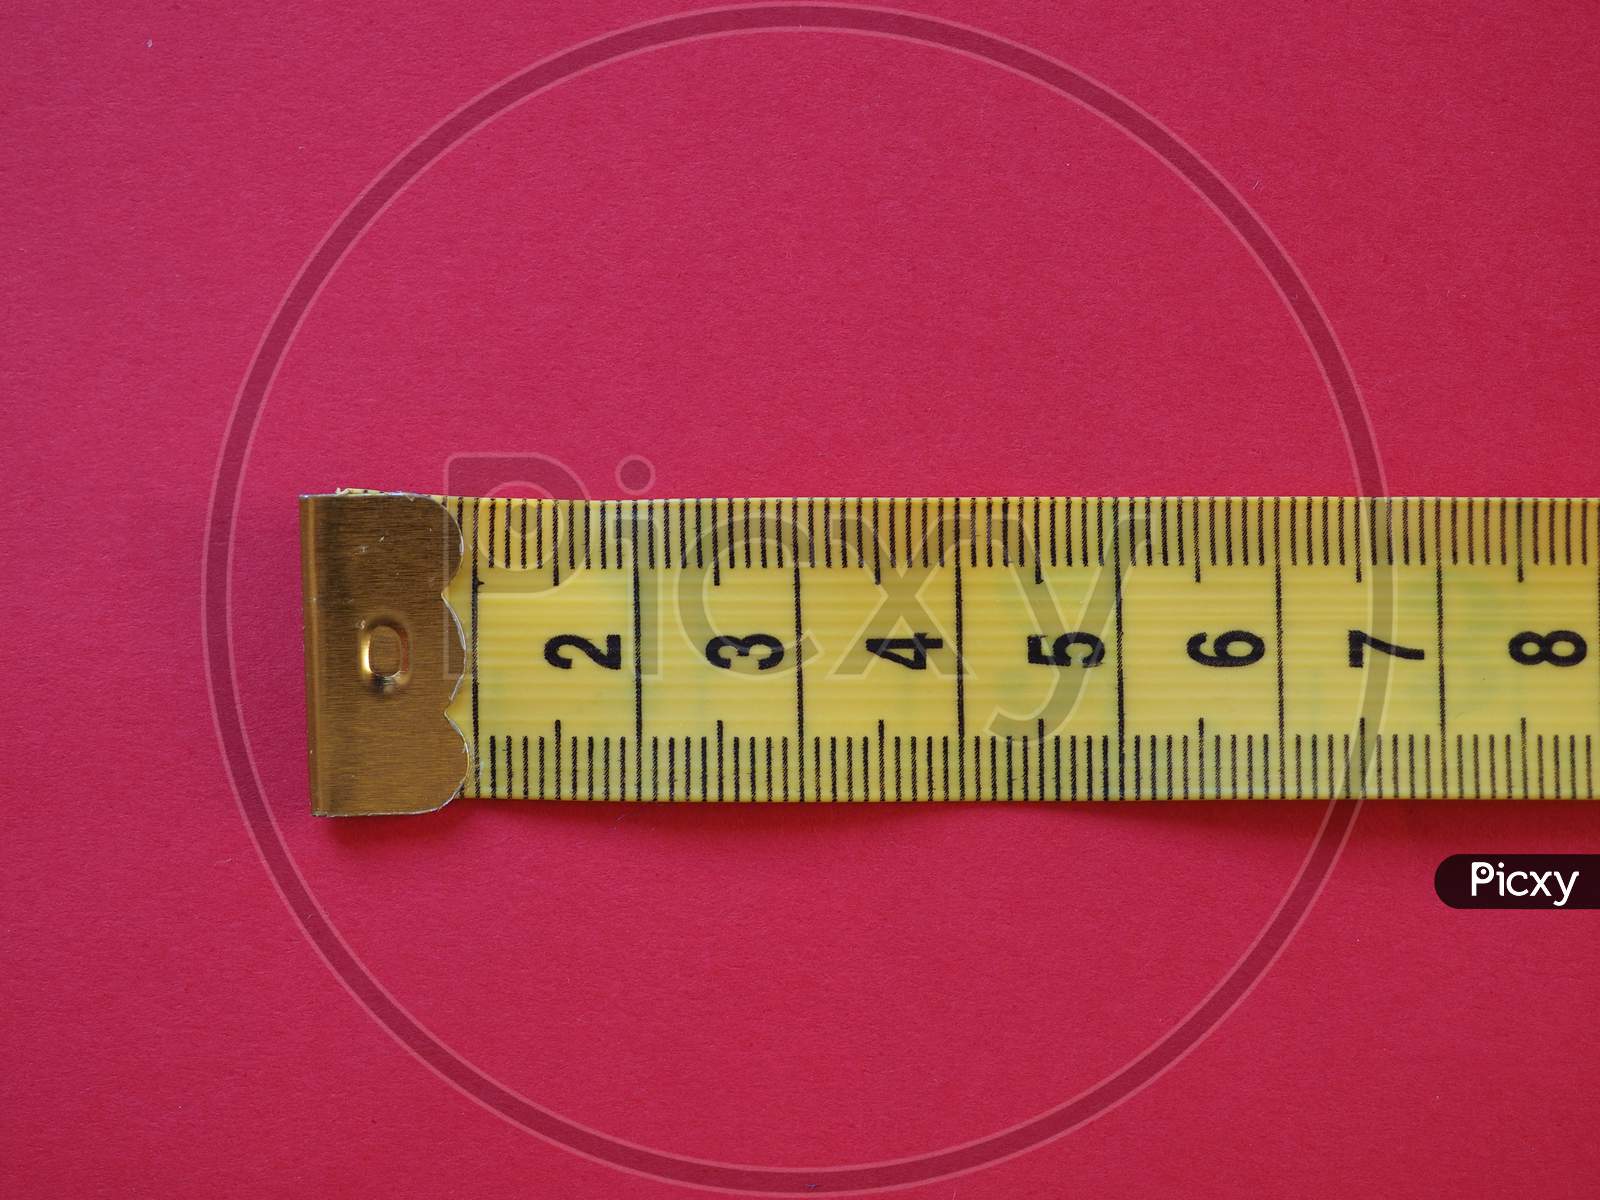 Ruler With Metric Units